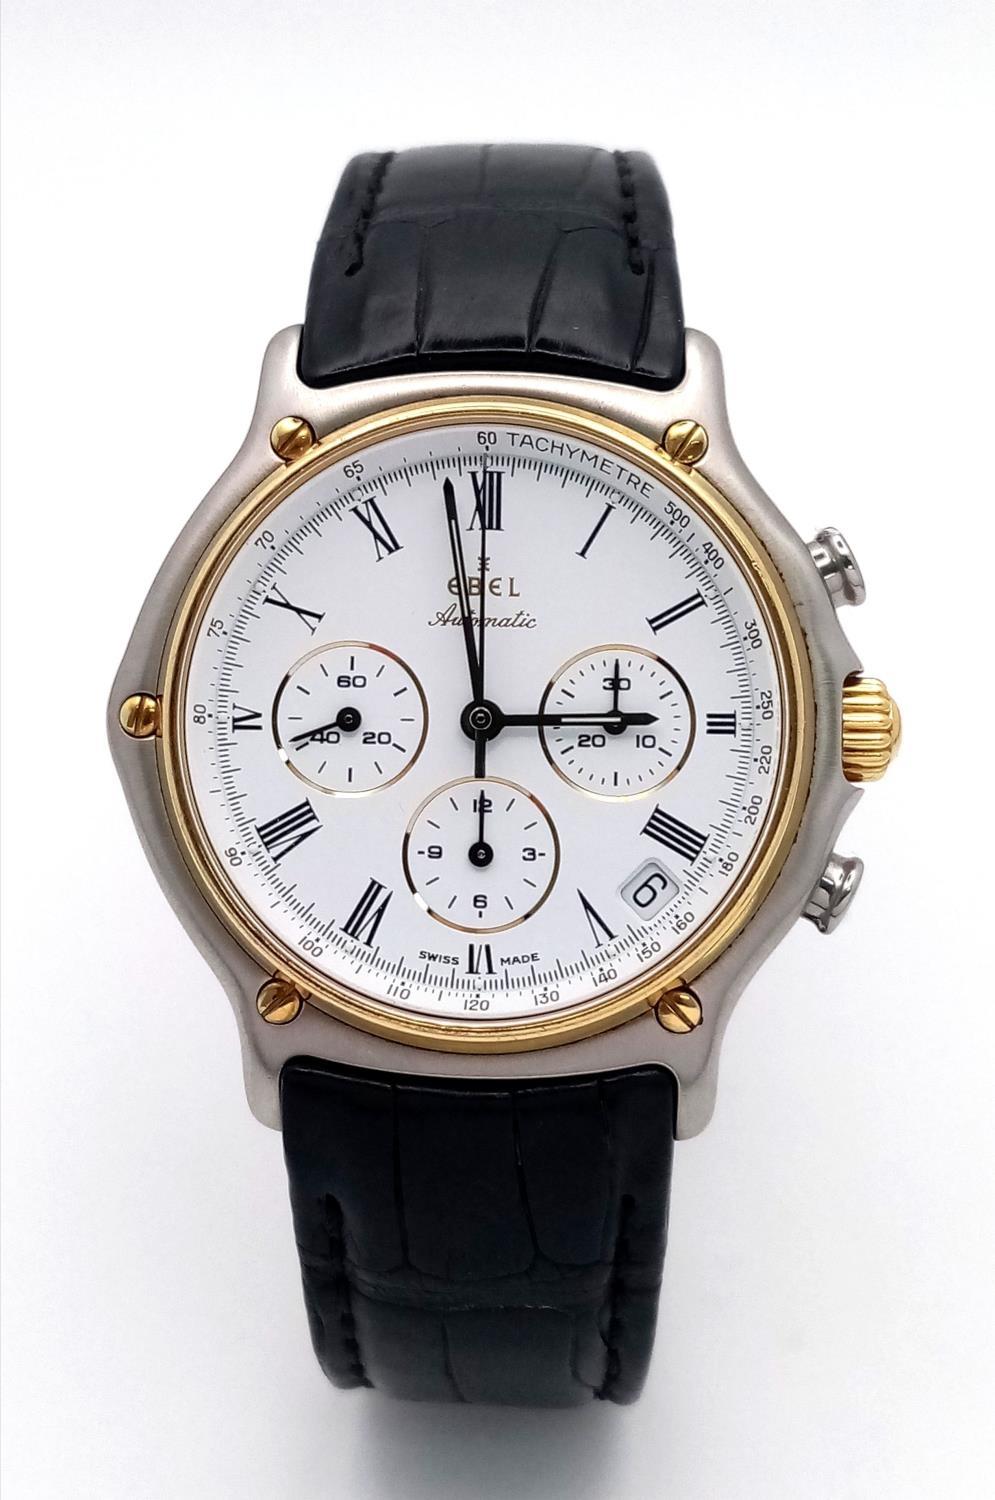 An Ebel Automatic Chronograph Gents Watch. Black leather strap. Two tone case - 38mm. White dial - Image 3 of 8